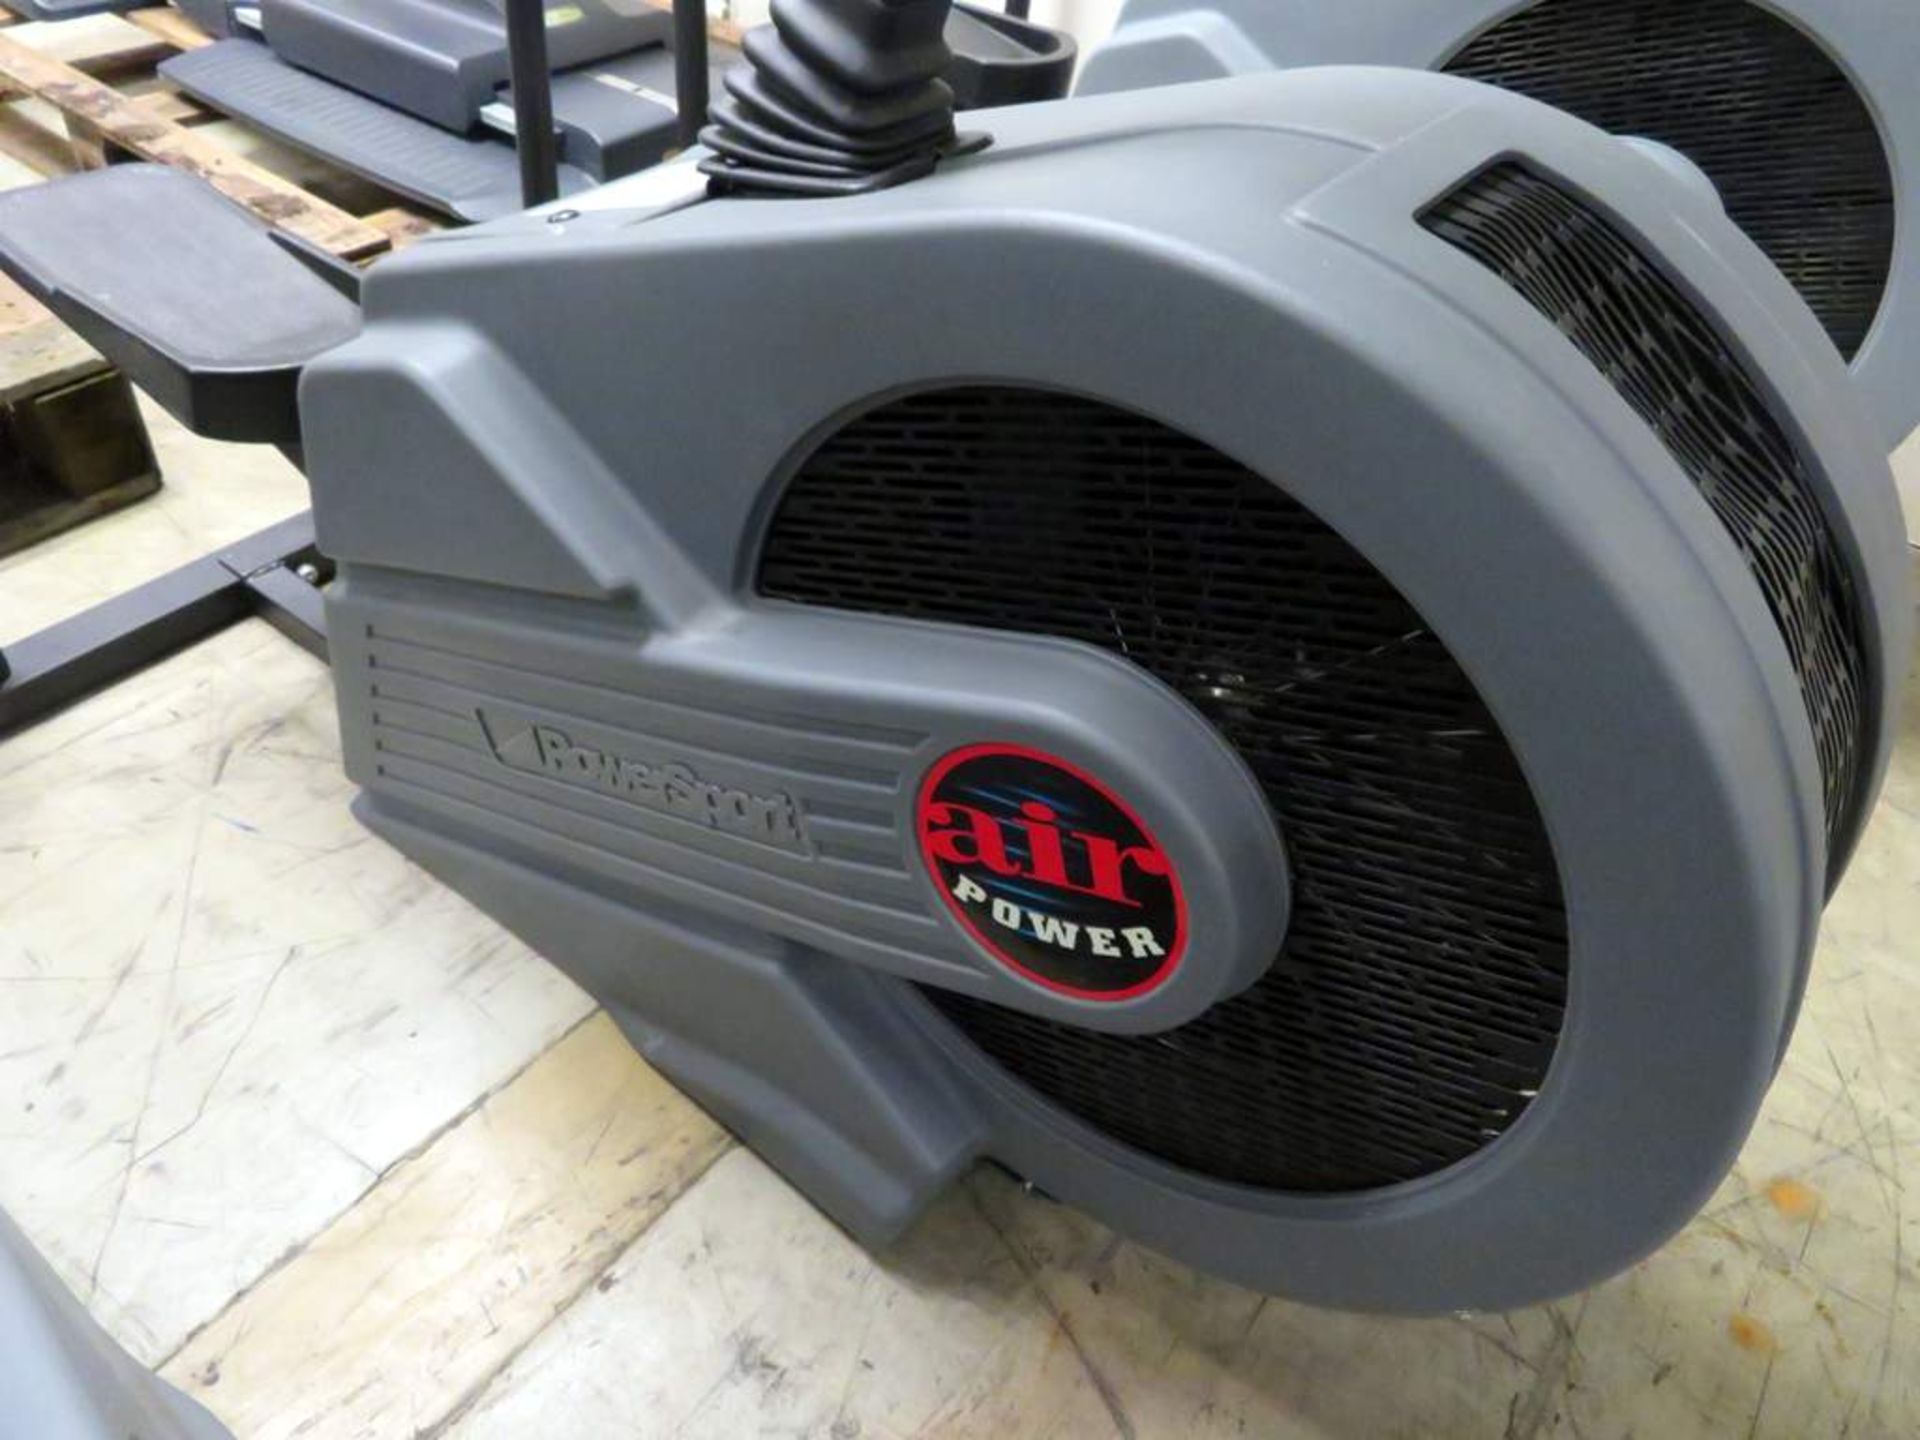 Power Sport XT 3000 Air Stepper Exercise Machine - Image 2 of 6